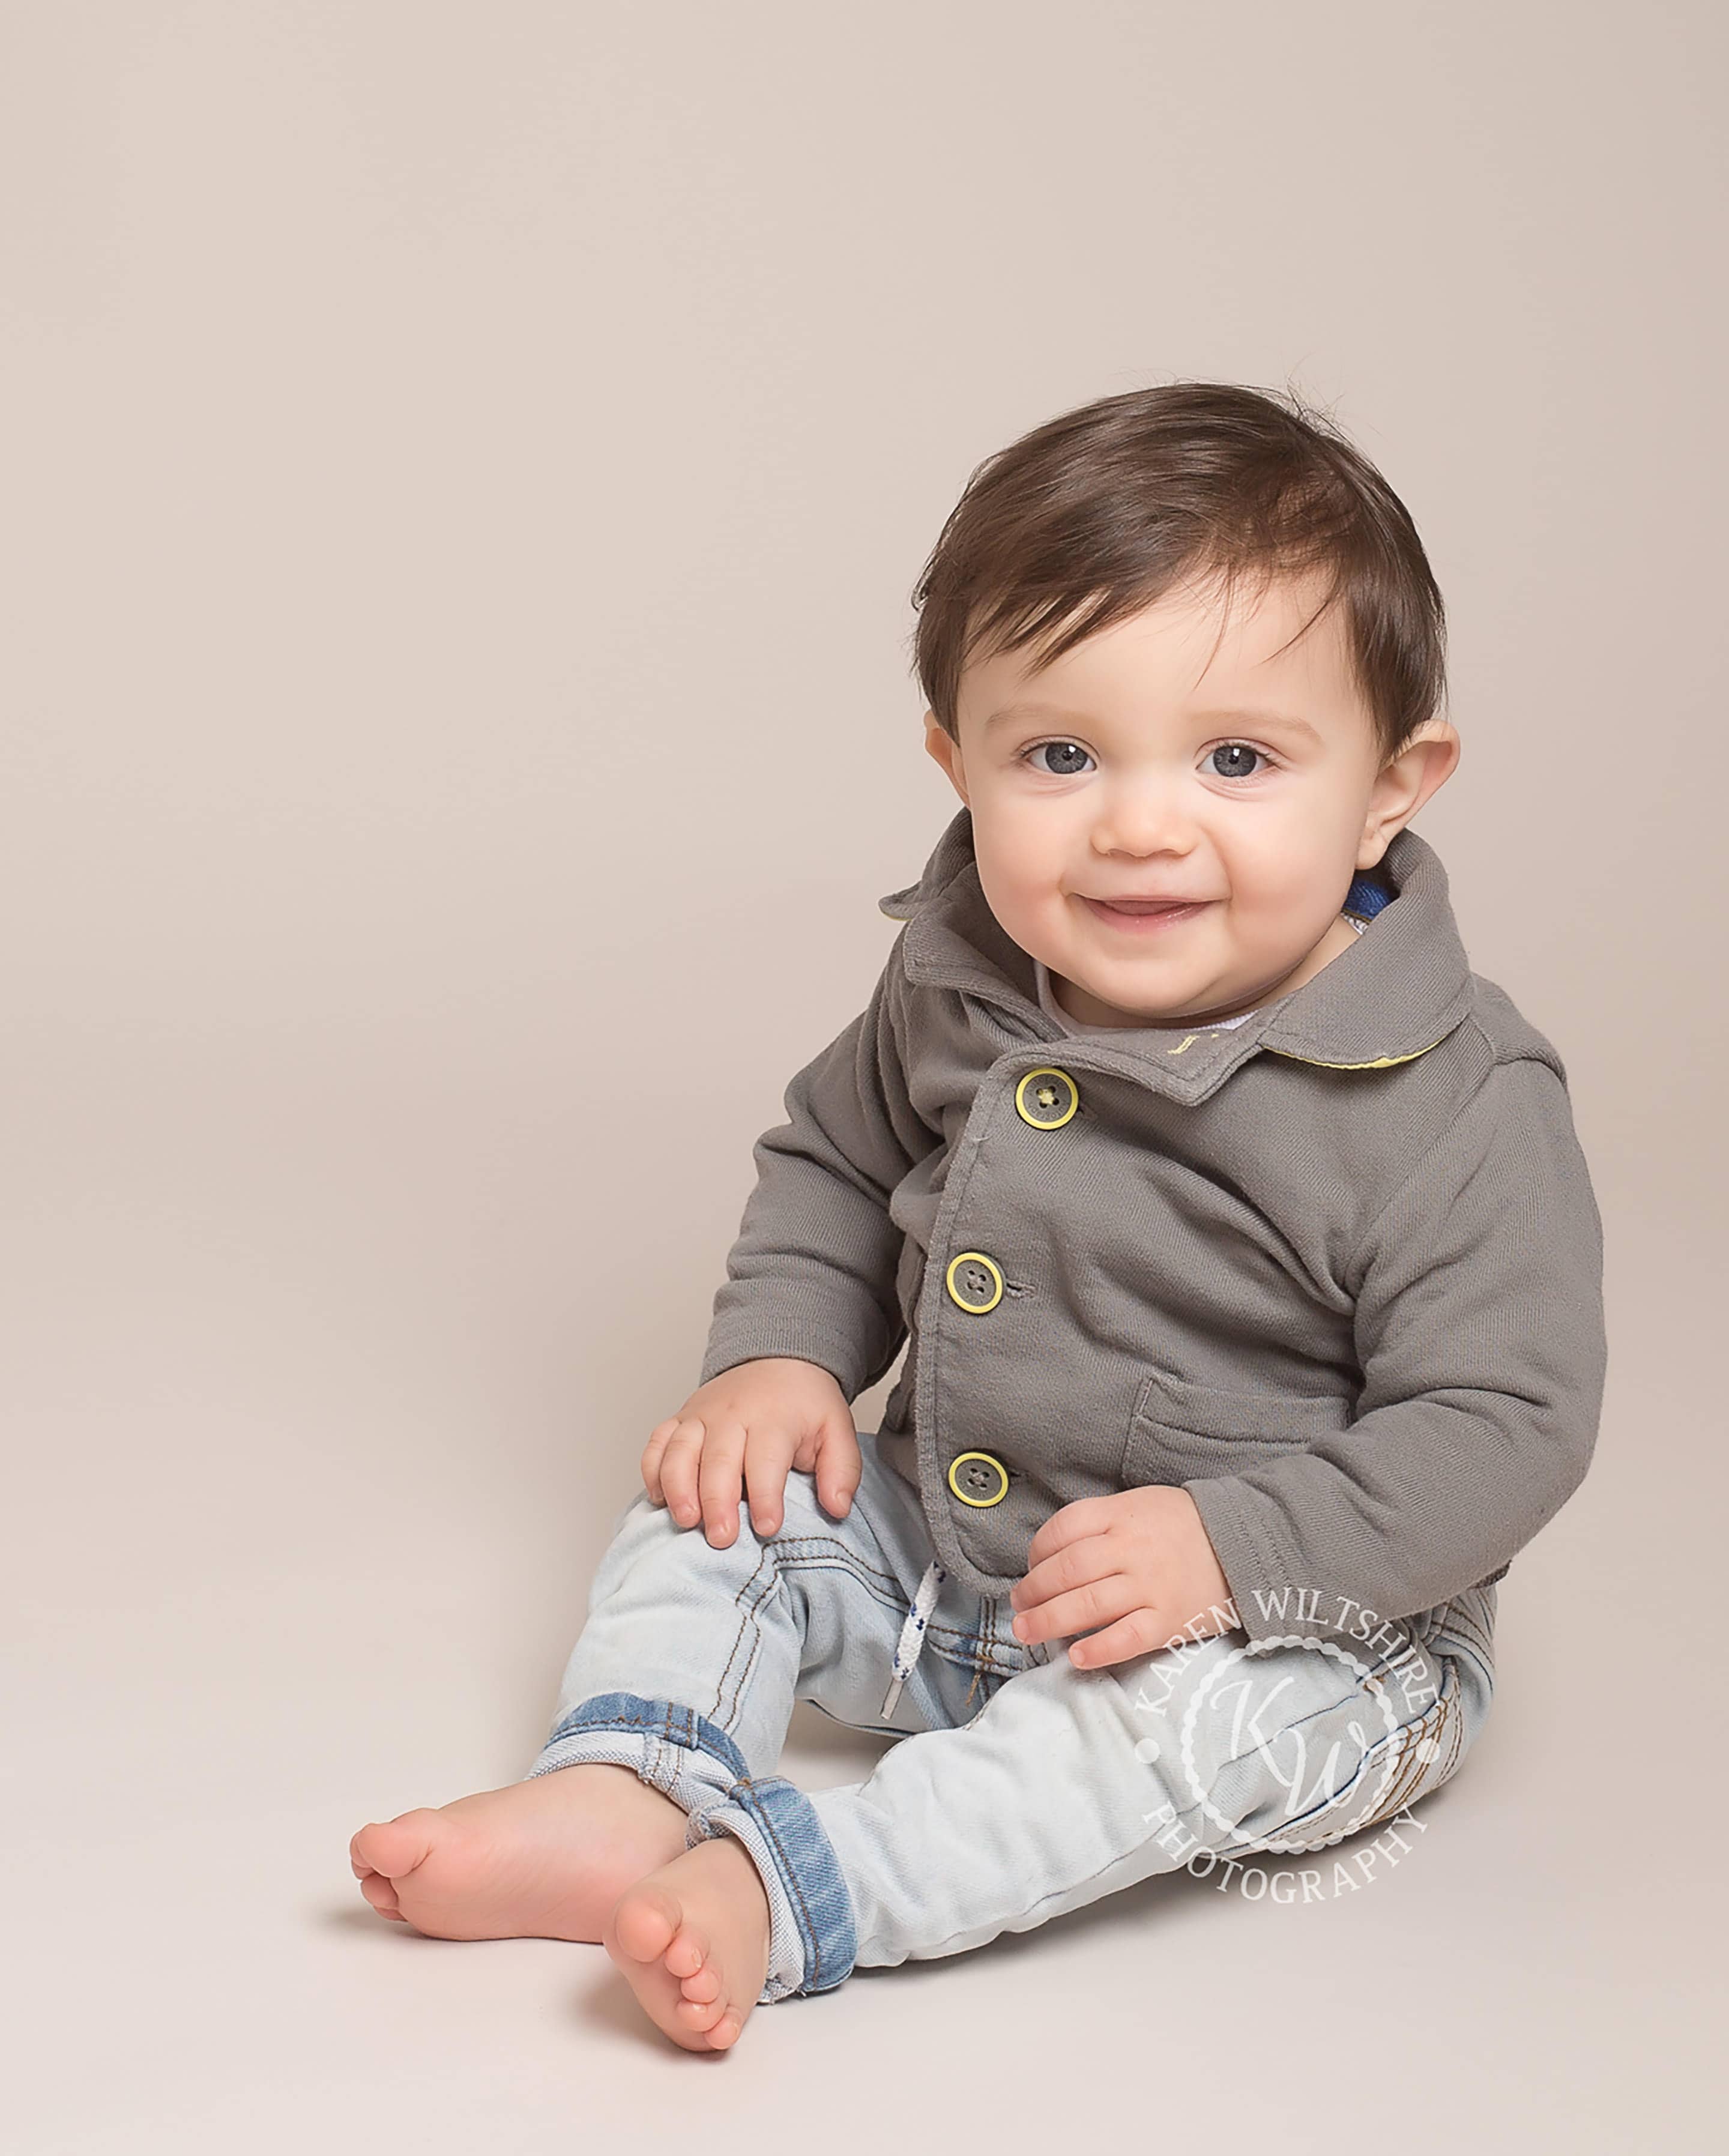 children & baby photography poole dorset, one year old boy sitting and smiling